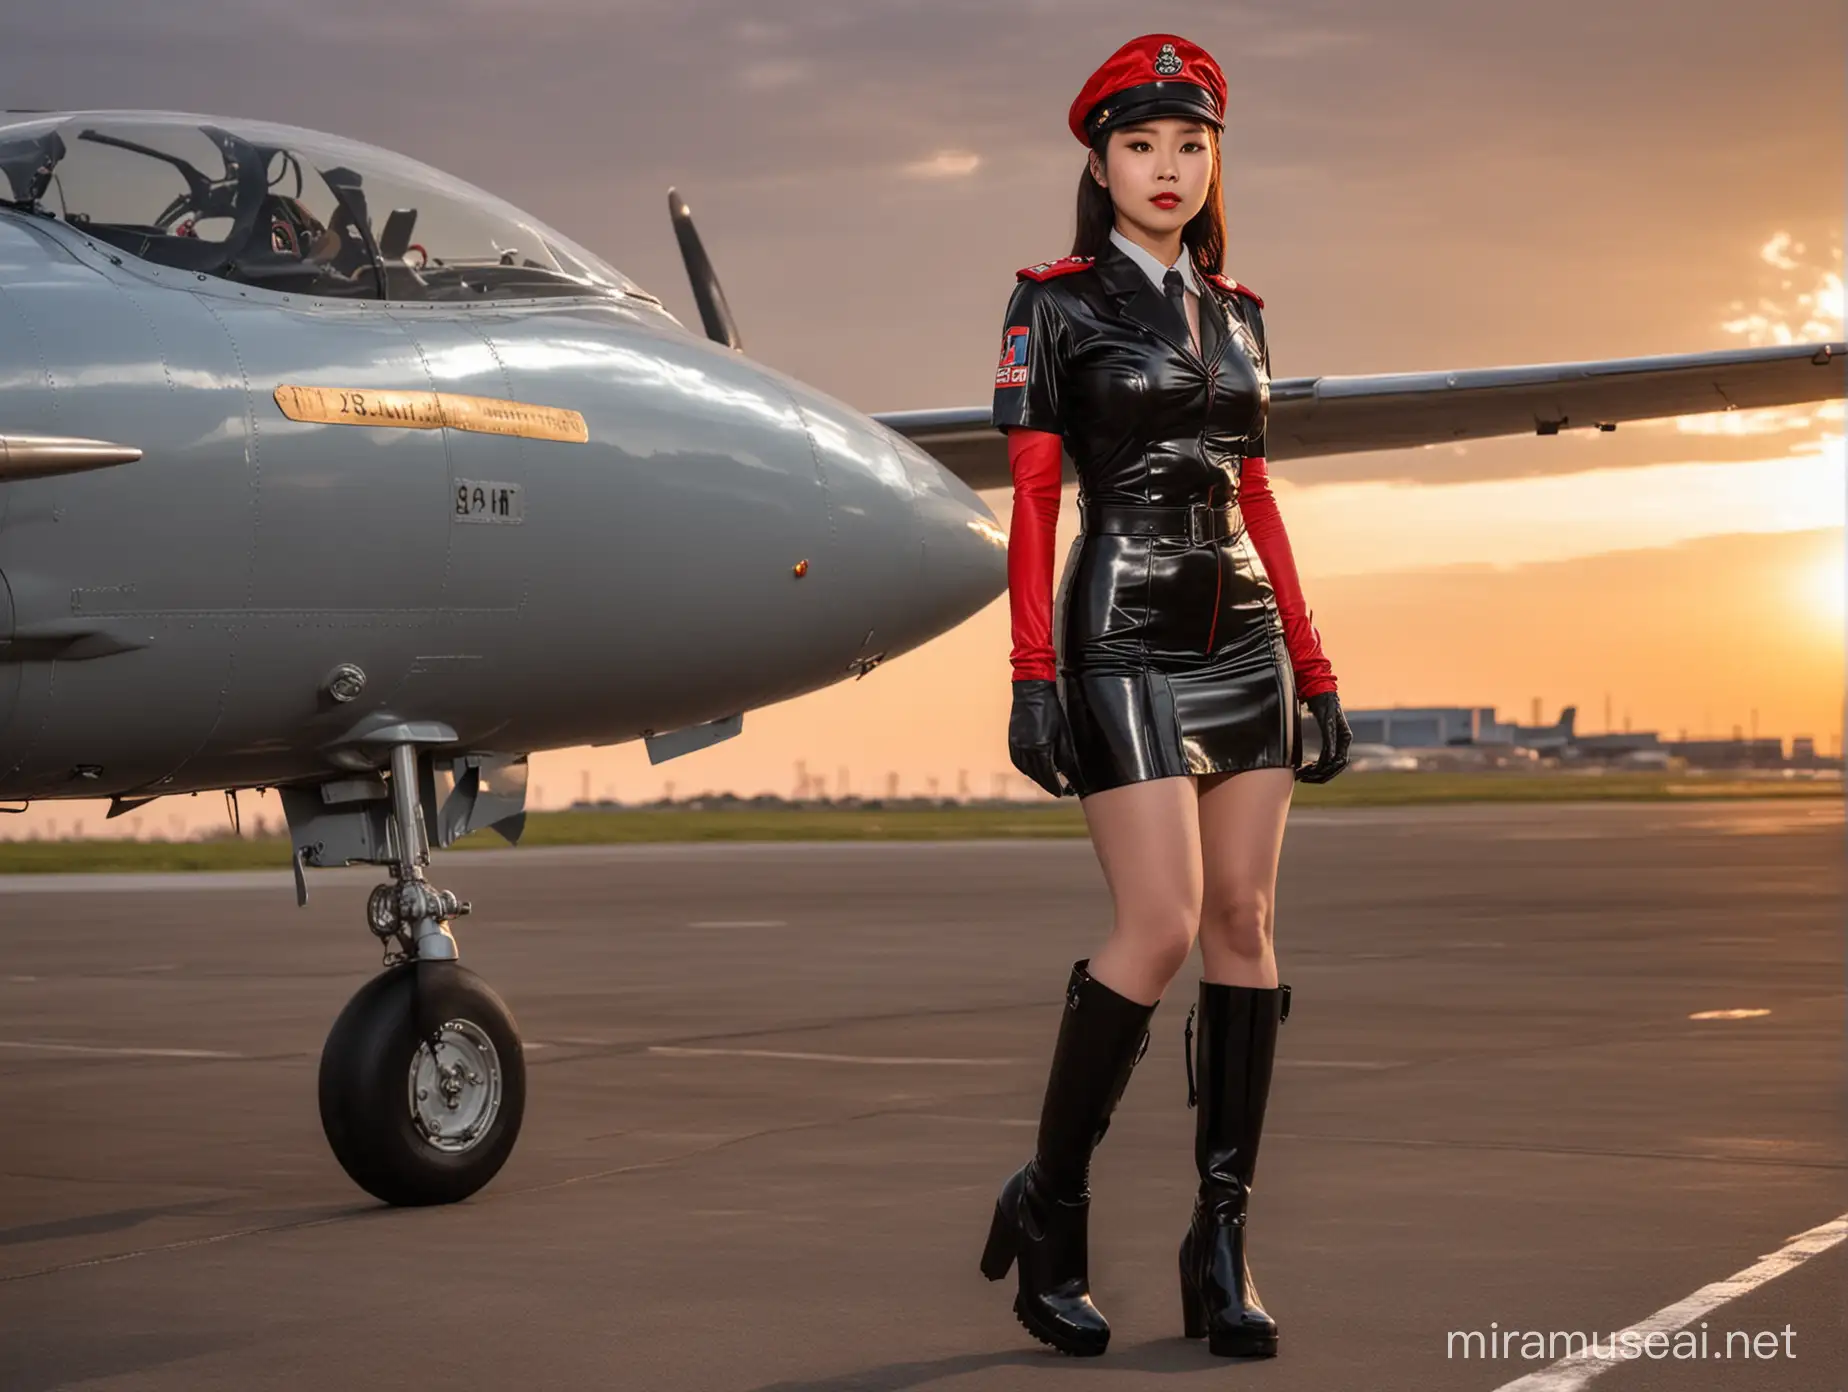 East Asian Military Pilot in Latex Uniform on Sunset Runway